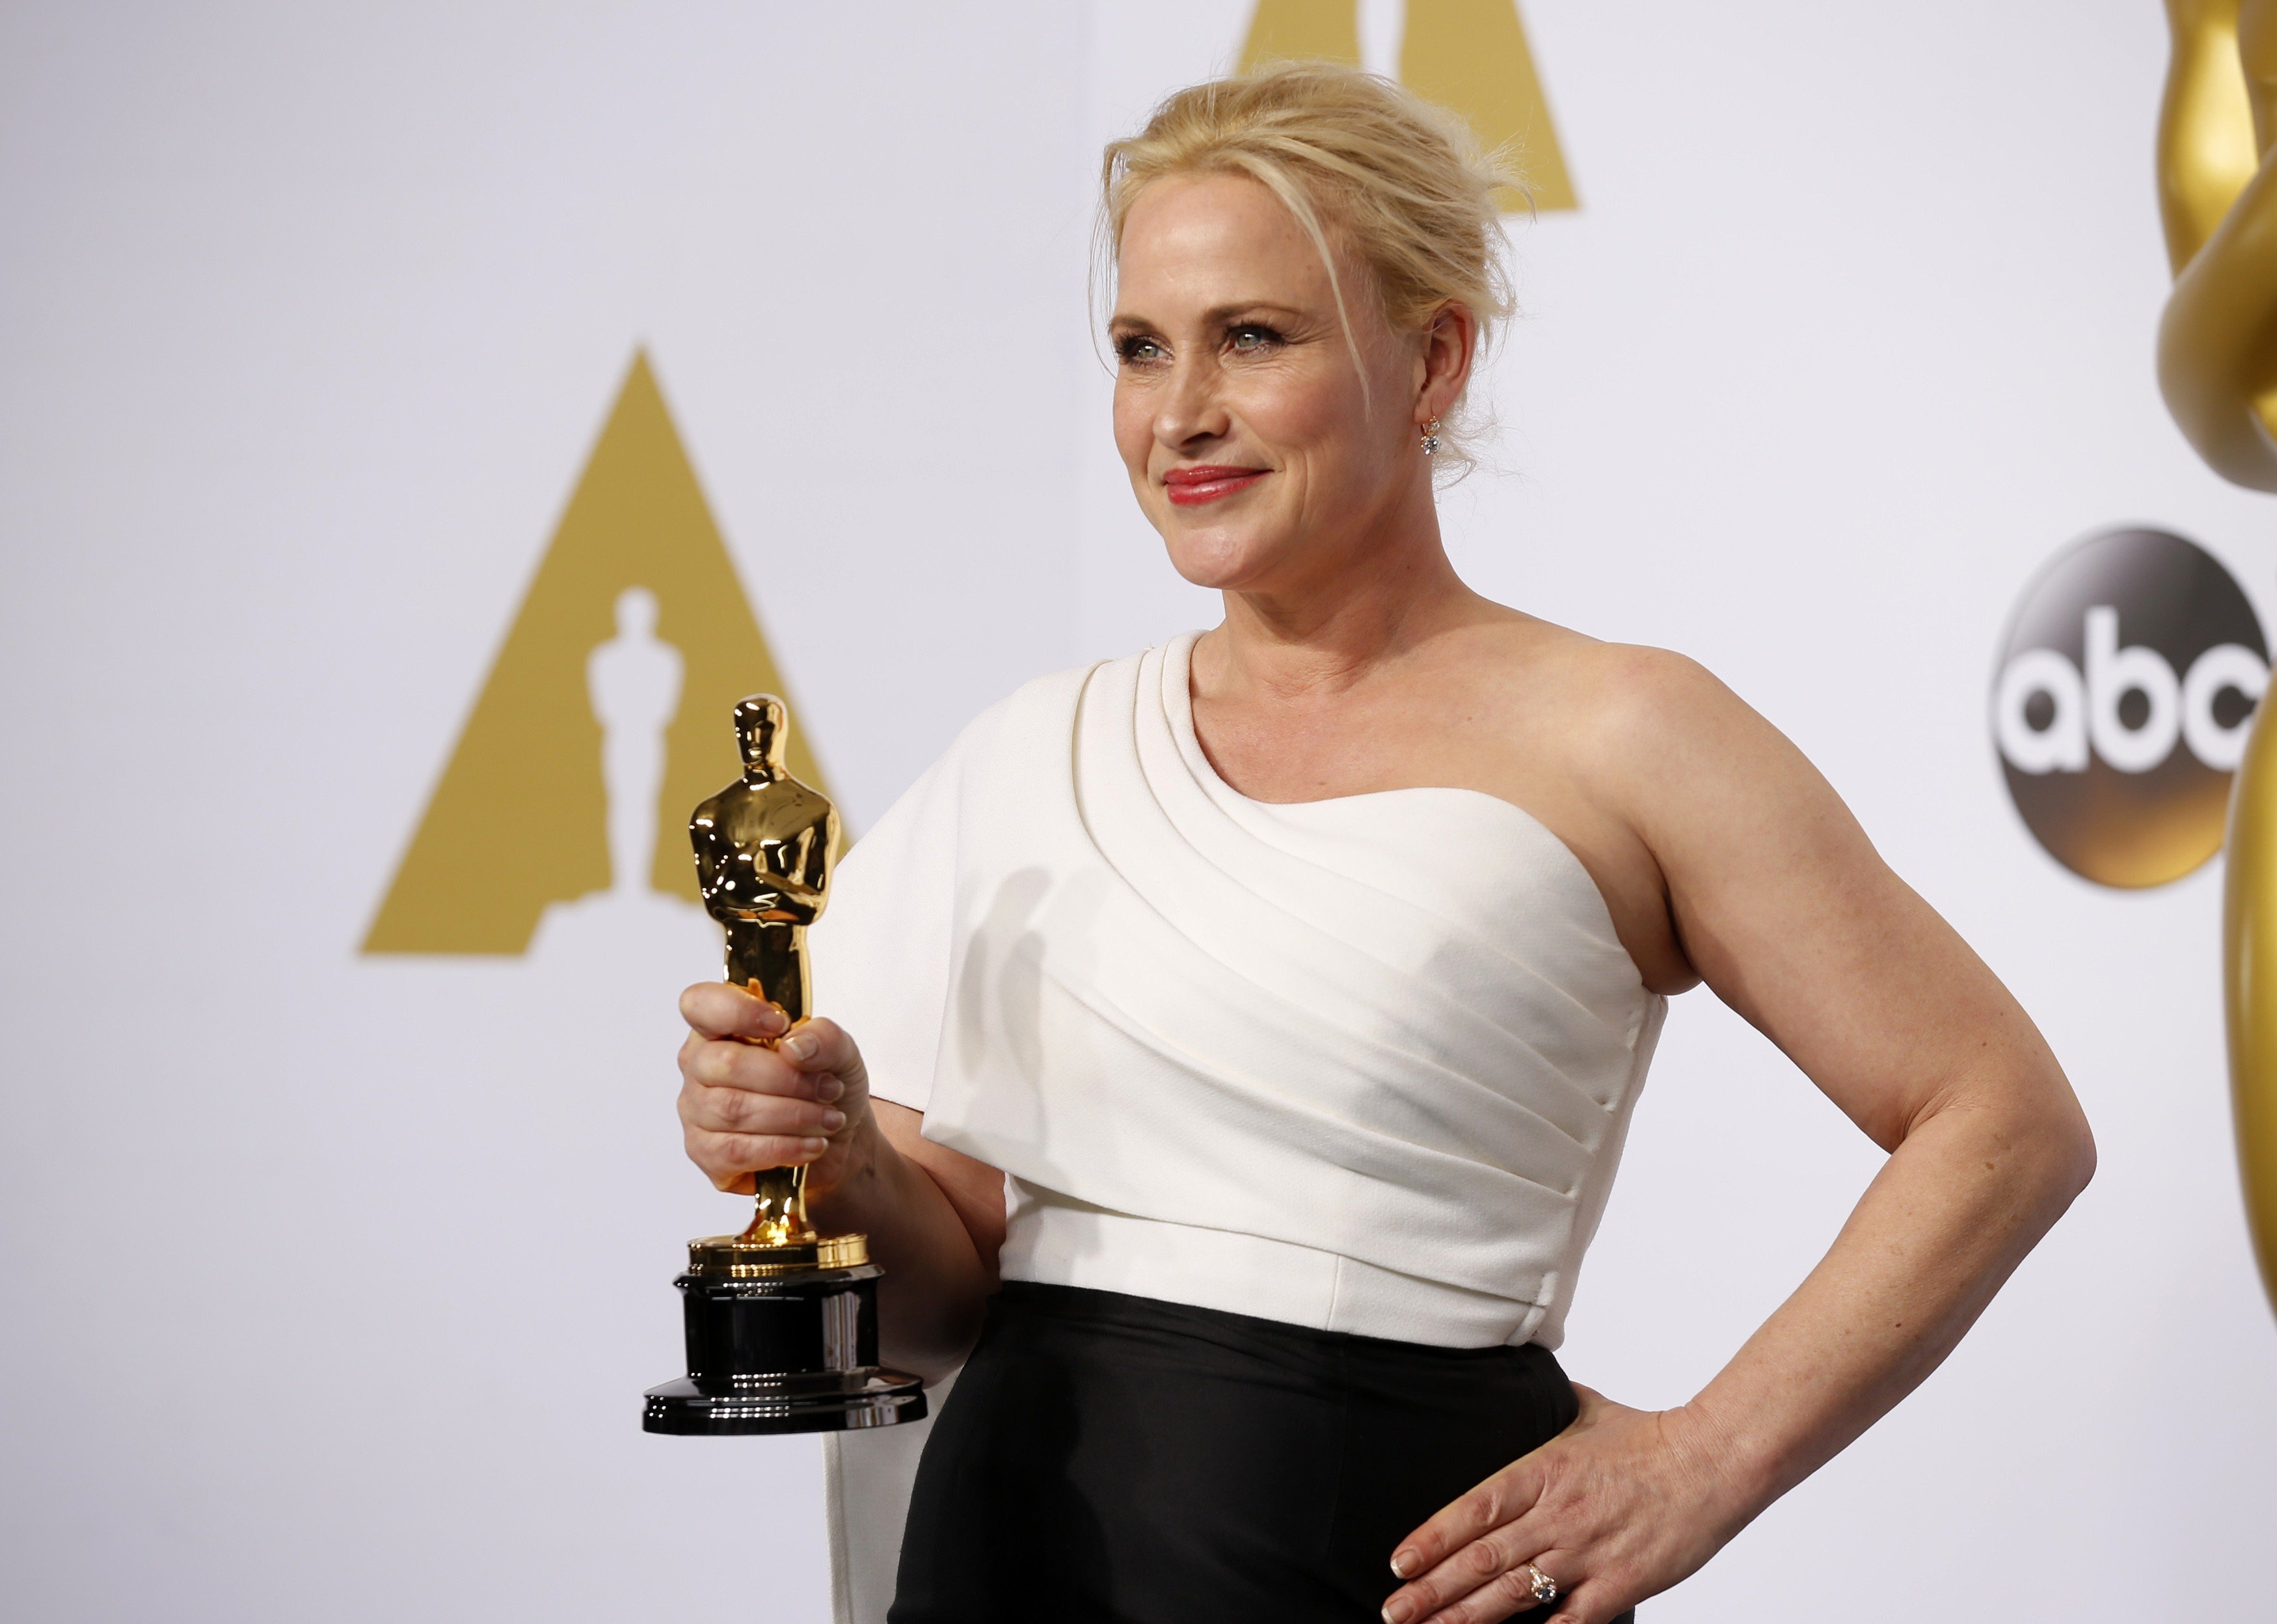 Patricia Arquette, best supporting actress winner for her role in "Boyhood," poses with her award during the 87th Academy Awards in Hollywood